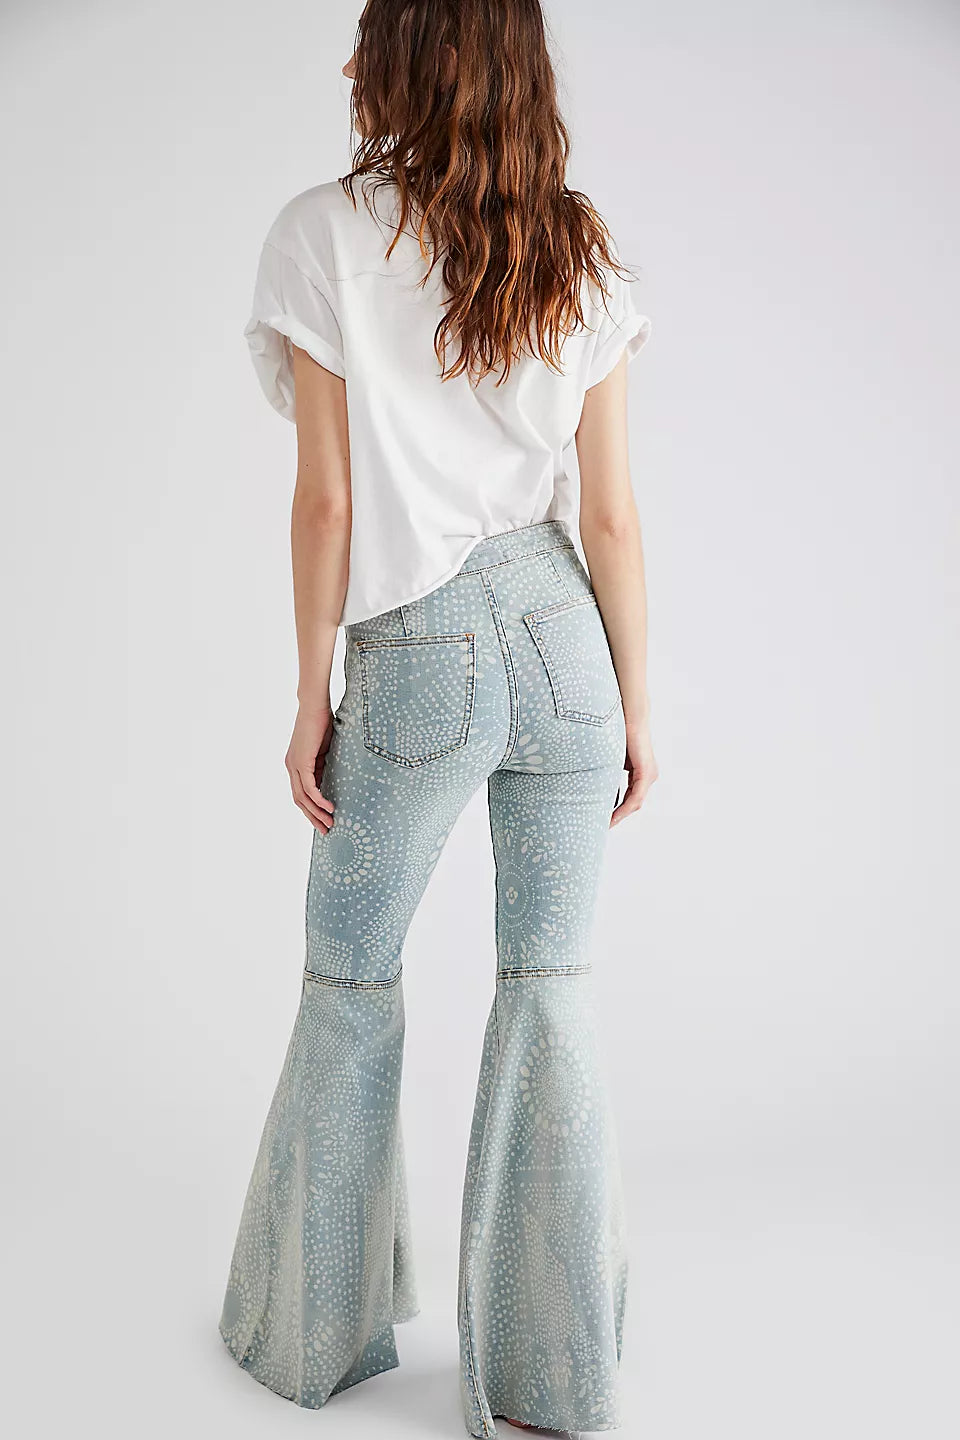 Free People Just Float On Flare Jericho Blue Jeans